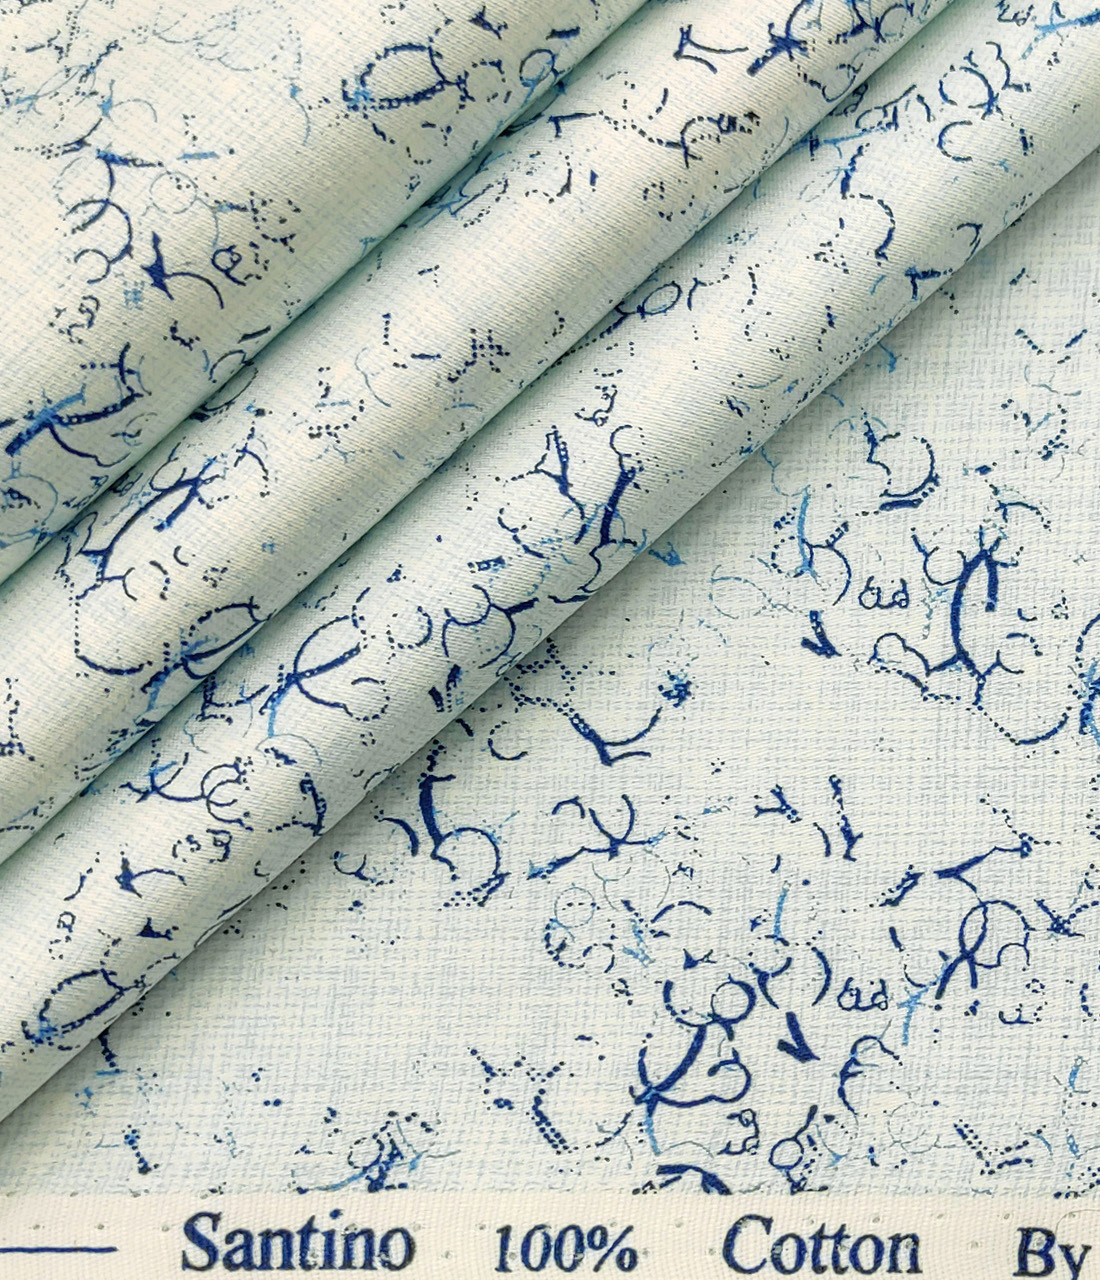 Bombay Rayon Men's Cotton Printed 2.25 Meter Unstitched Shirting Fabric (Sky Blue)